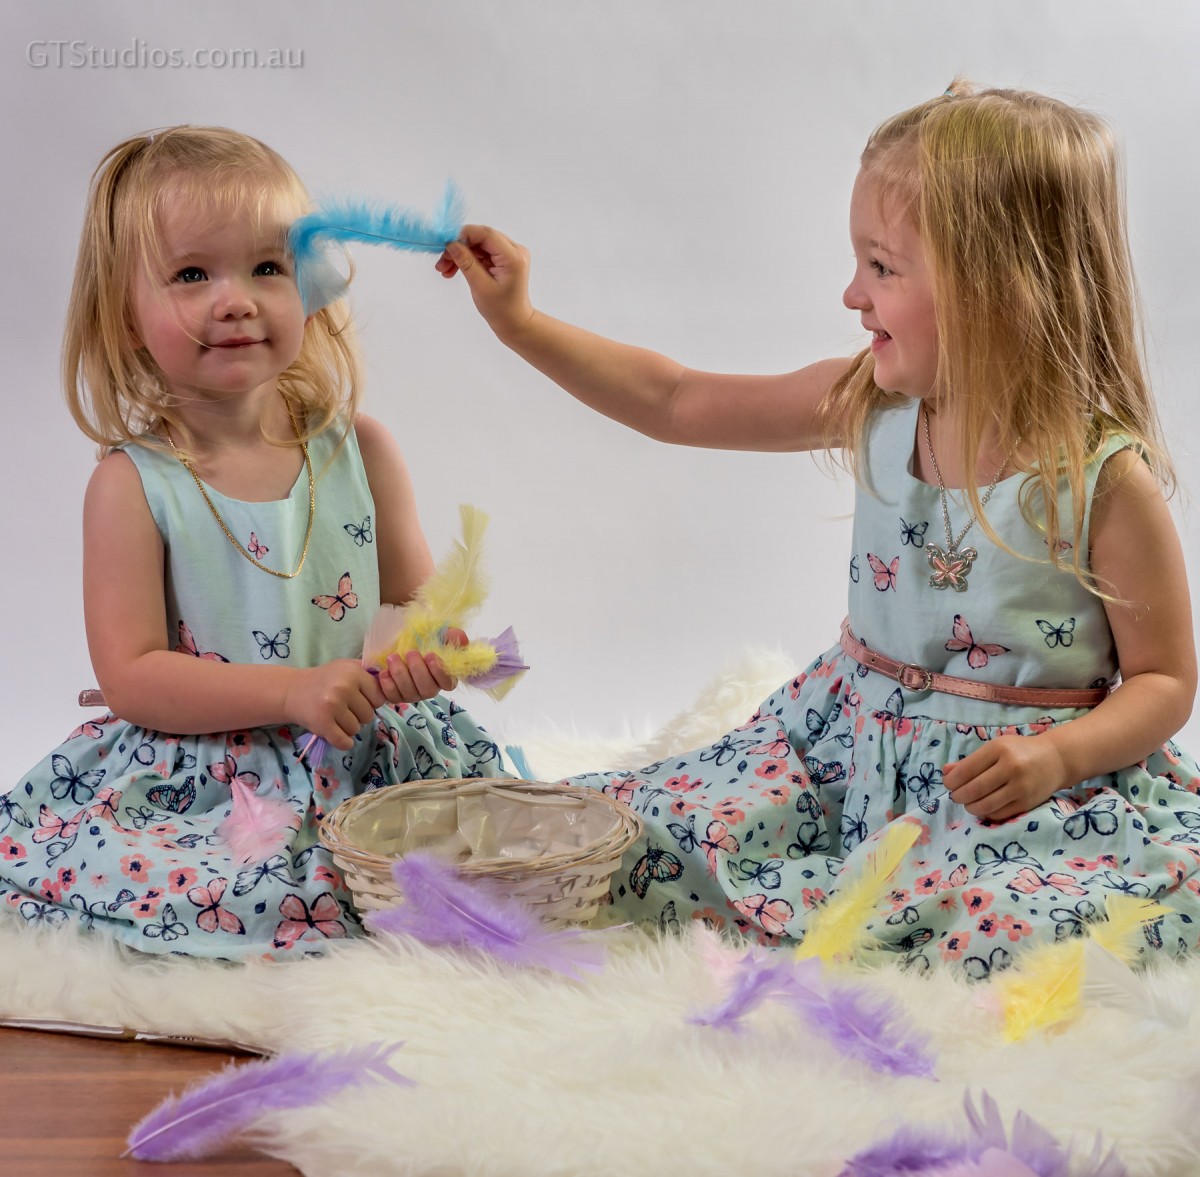 Tickled - beautiful young girls with feathers on rug